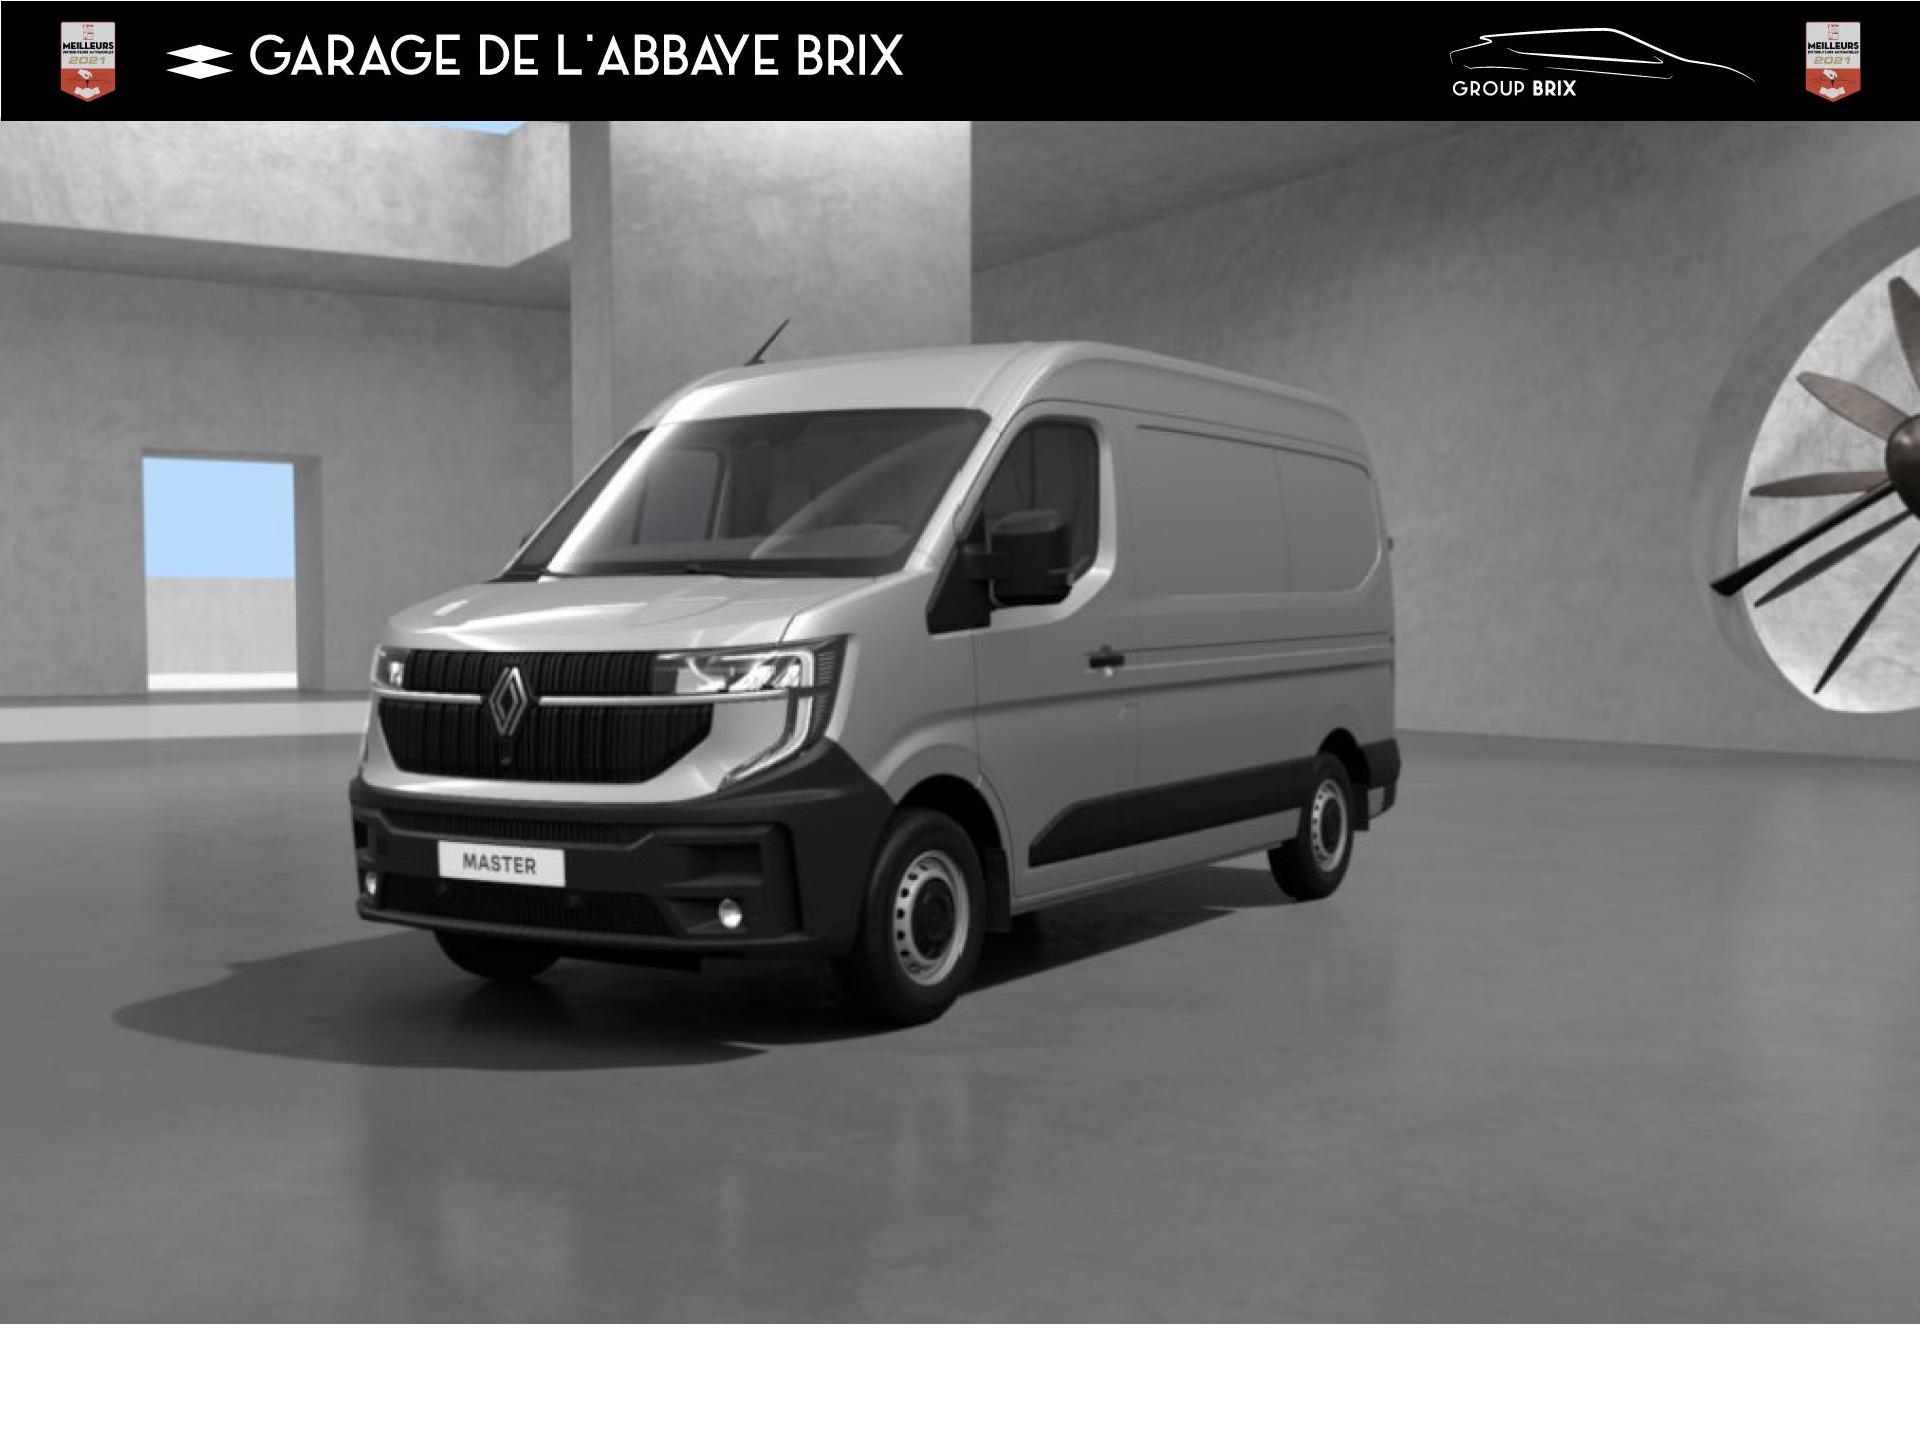 RENAULT-MASTER-Master Extra 3t5 L2H2 2.0 Blue dCi - 170  IV FOURGON Fourgon L2H2 Traction 